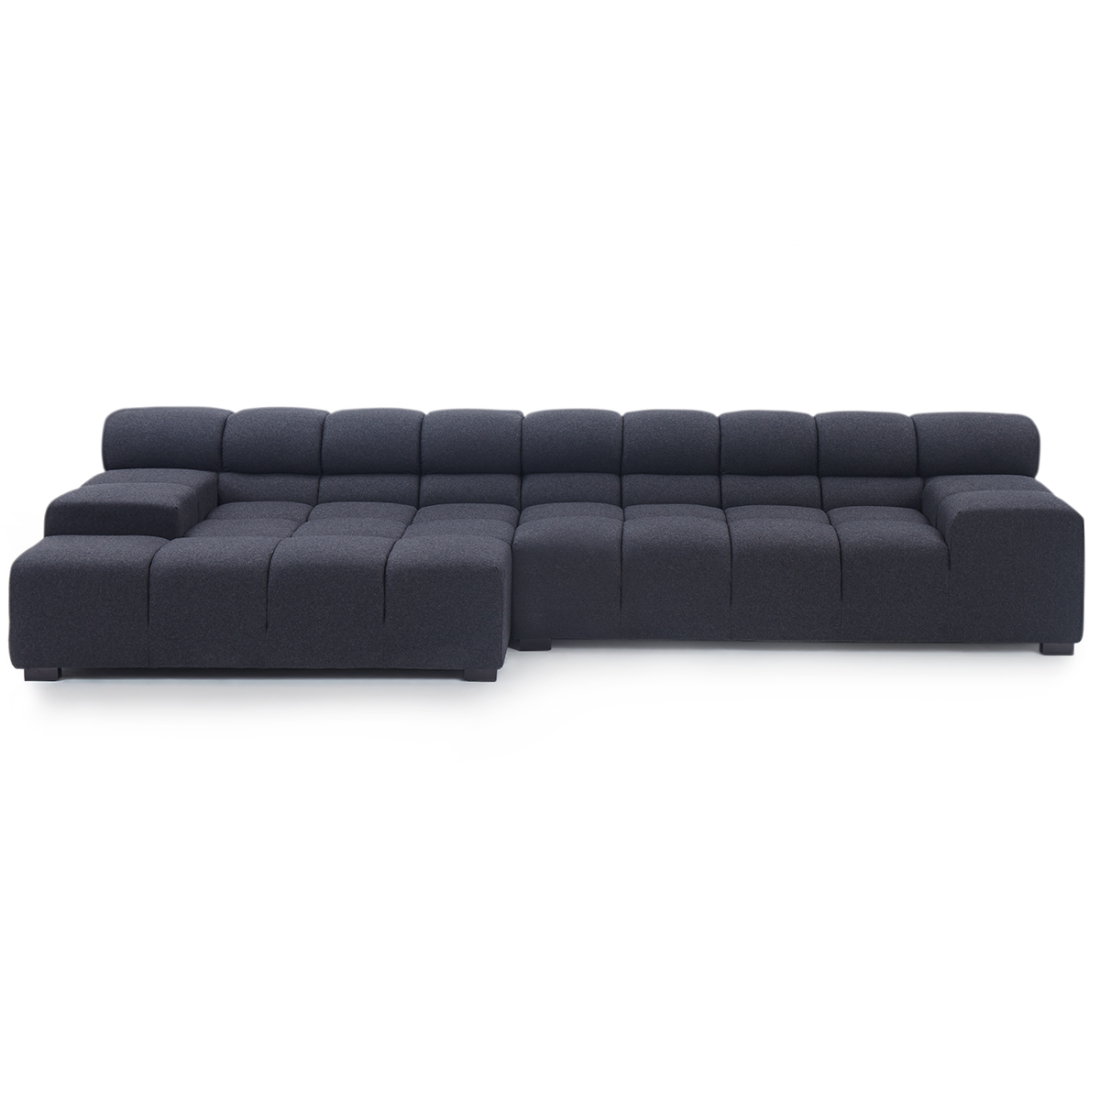 Tufted Sofa | Sectional 010
